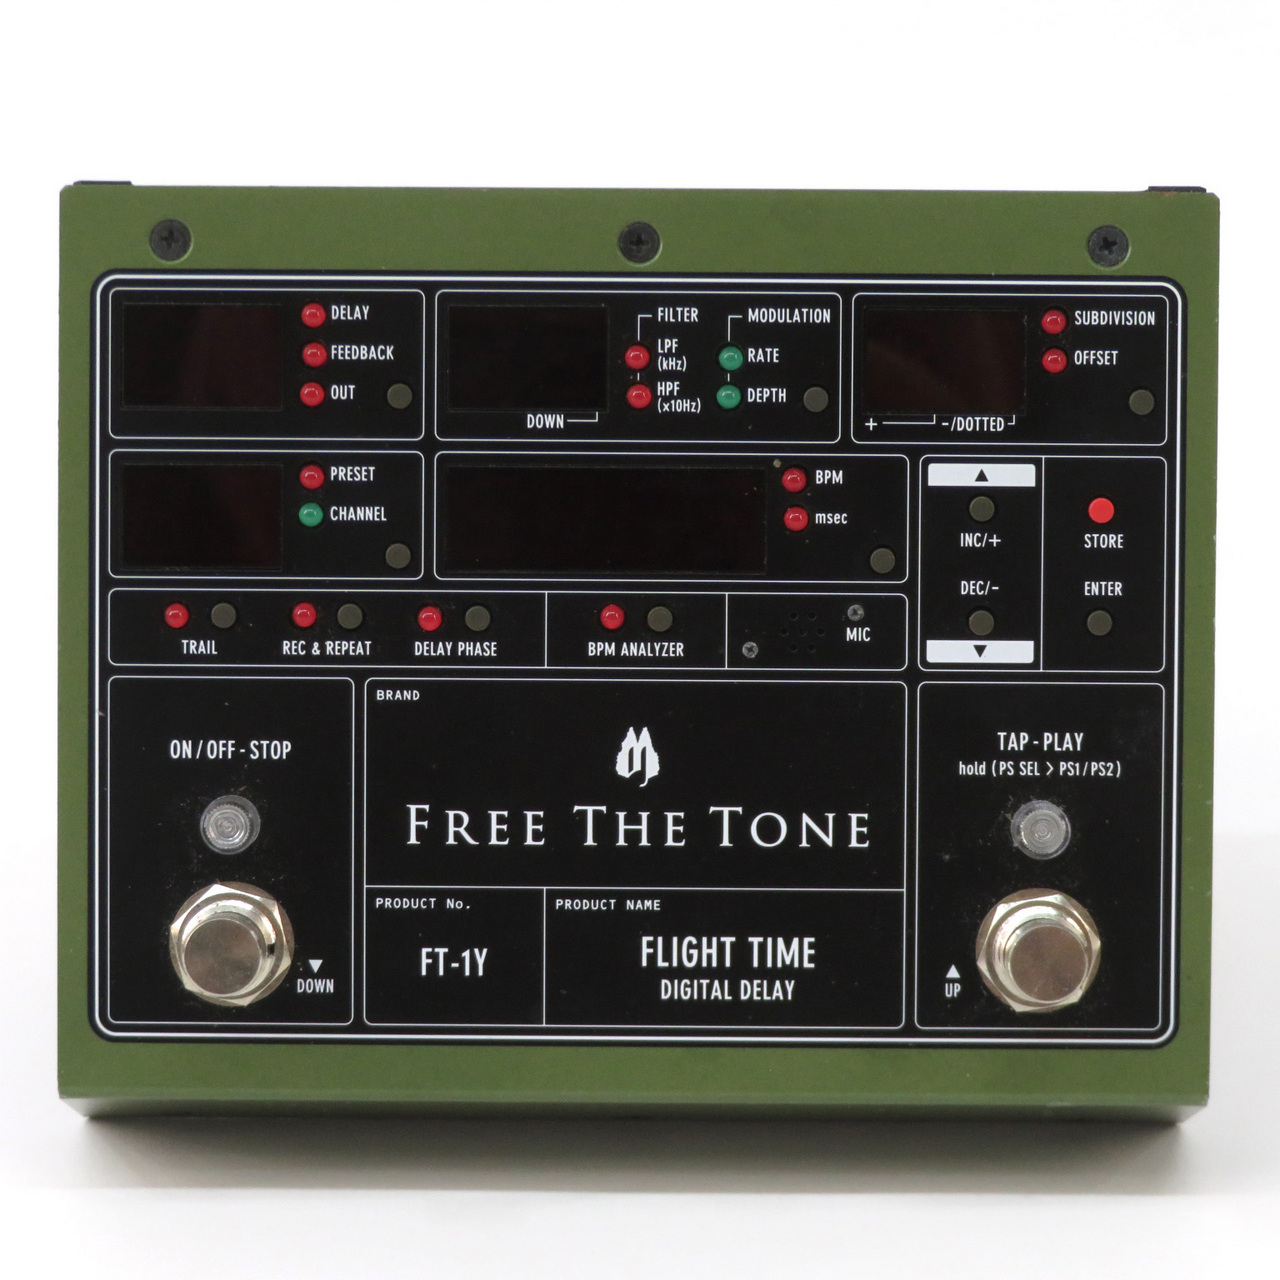 Free The Tone FT-1Y / FLIGHT TIME DELAY